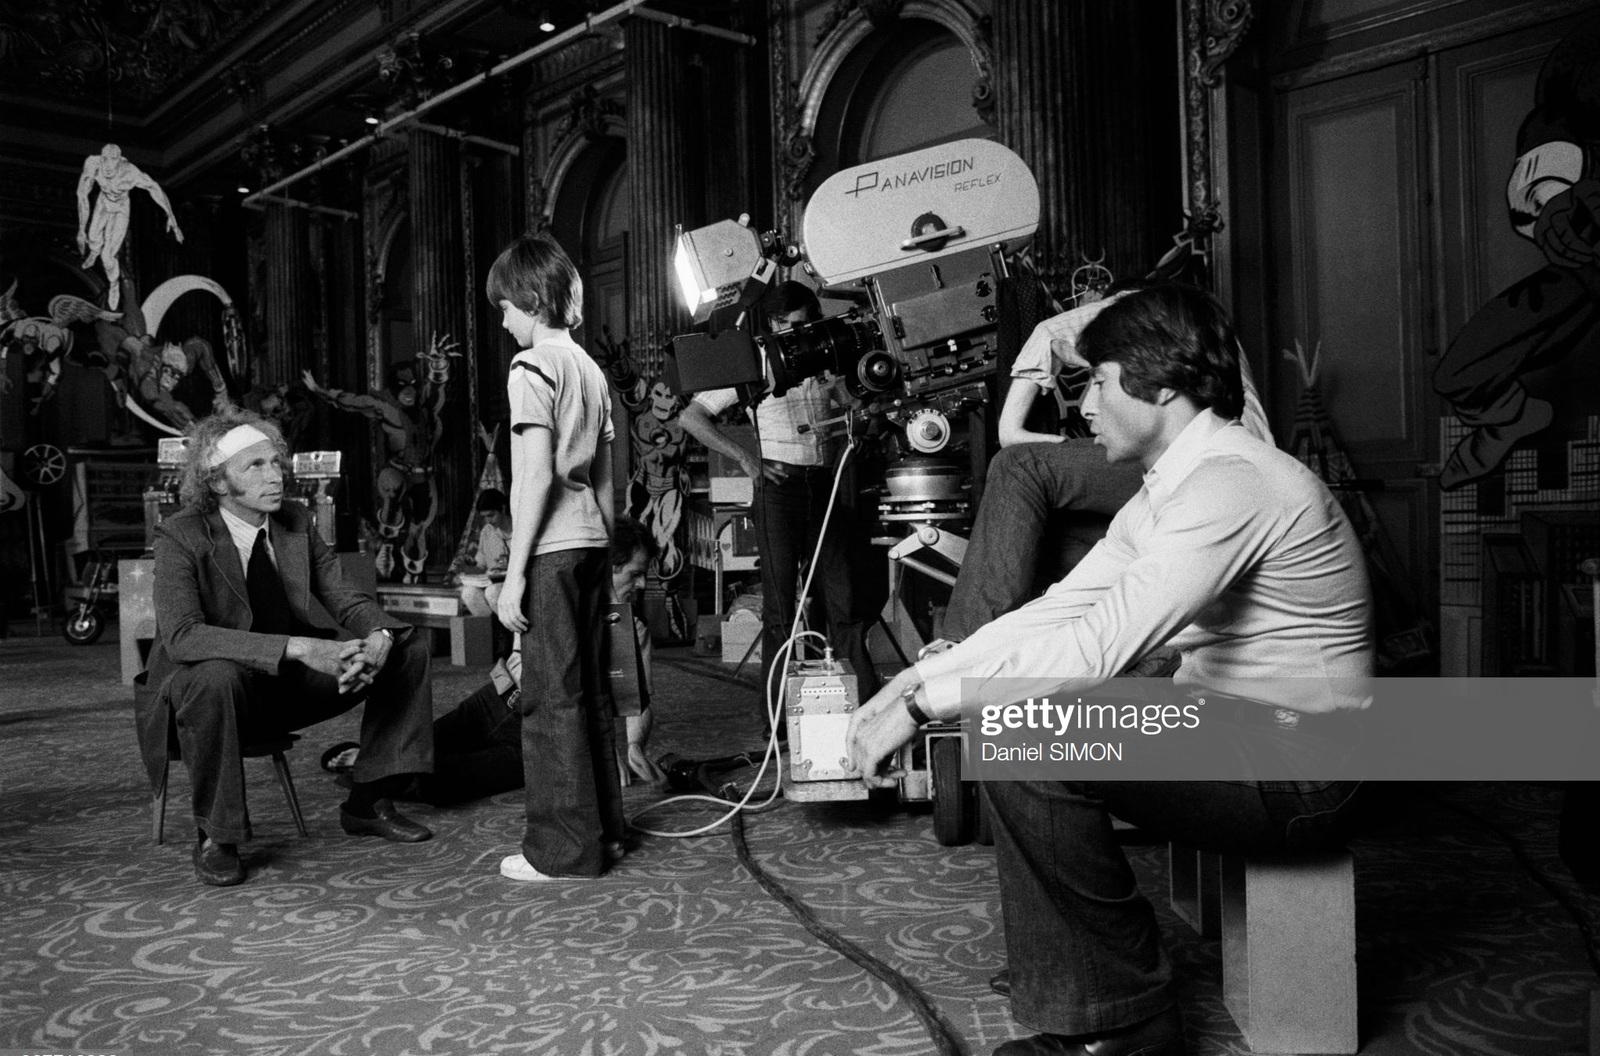 Behind the scenes of famous French films - Movies, French cinema, Classic, Behind the scenes, Photos from filming, Longpost, Celebrities